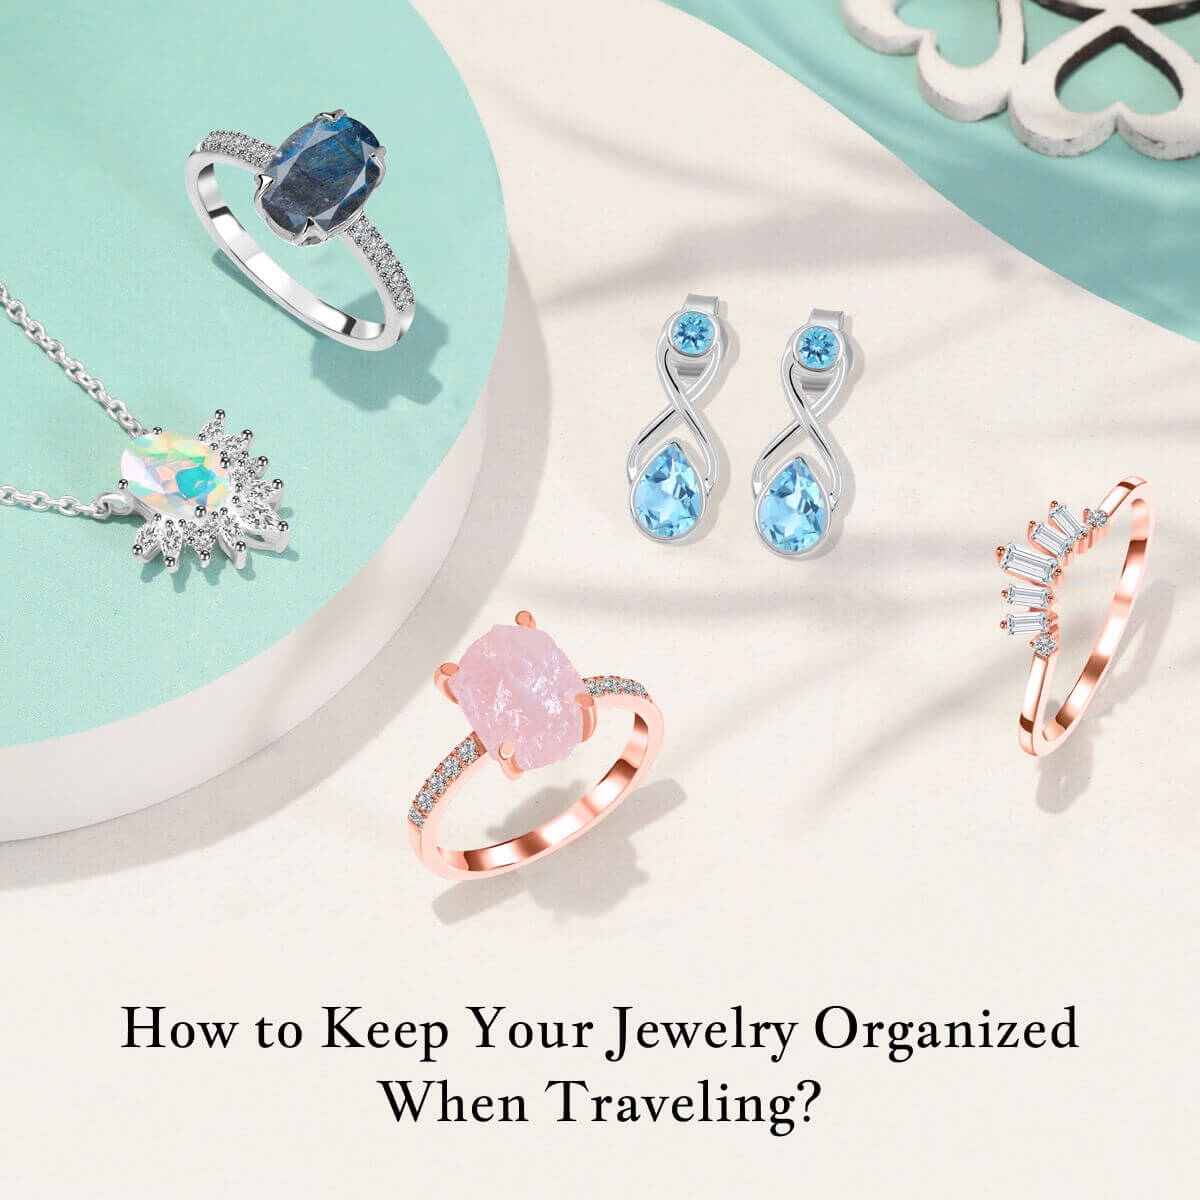 How to Keep Your Jewelry Organized When Traveling?